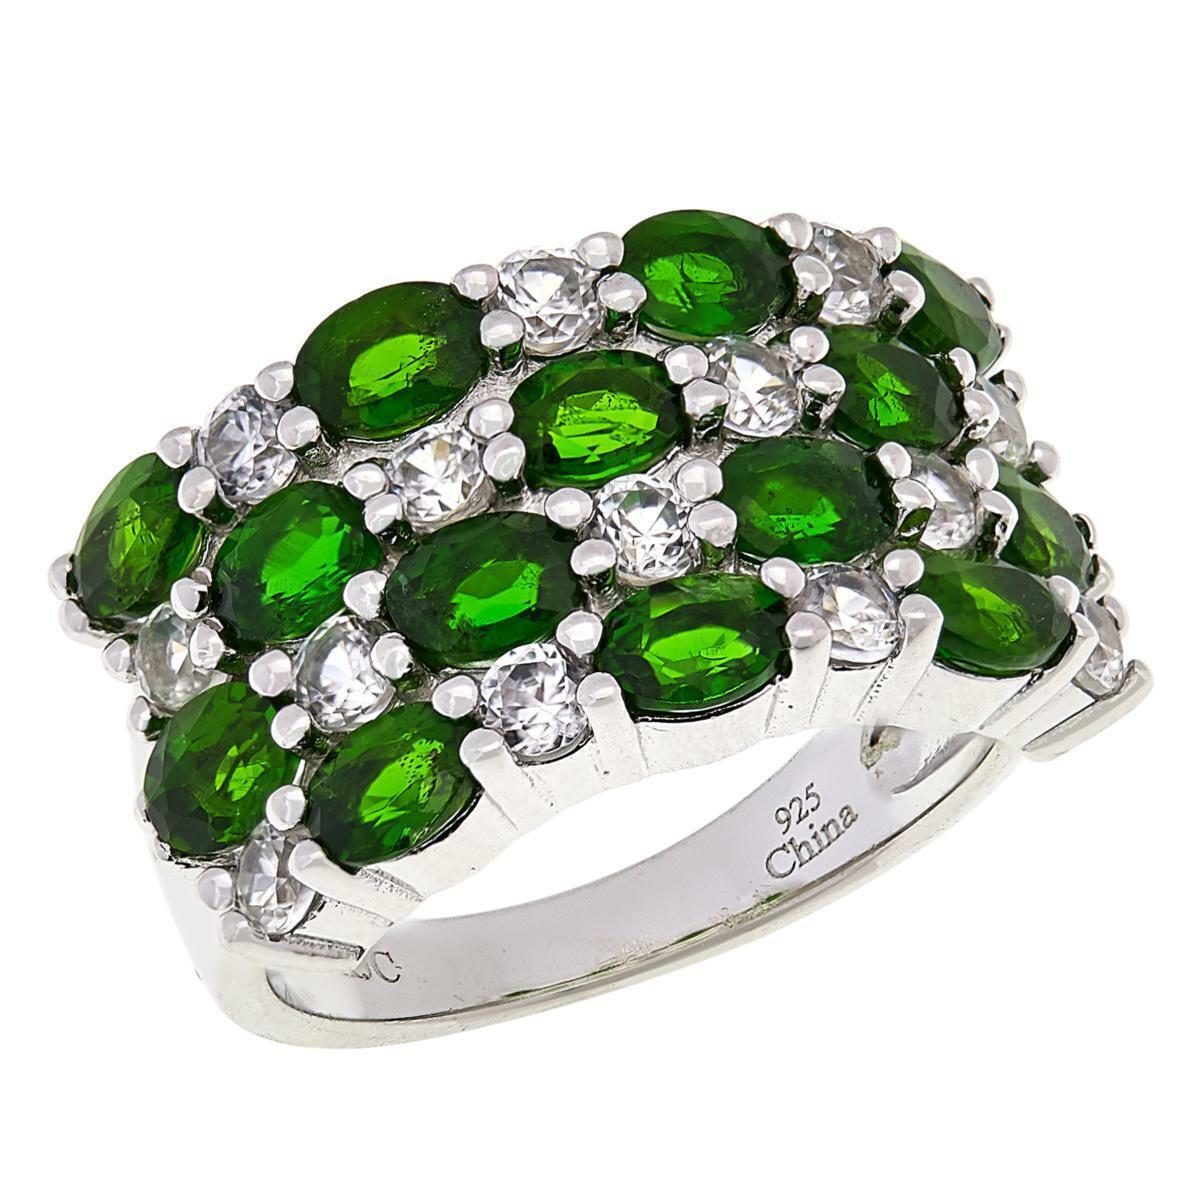 Colleen Lopez Chrome Diopside and White Zircon 4 Row Band Ring, Size 6